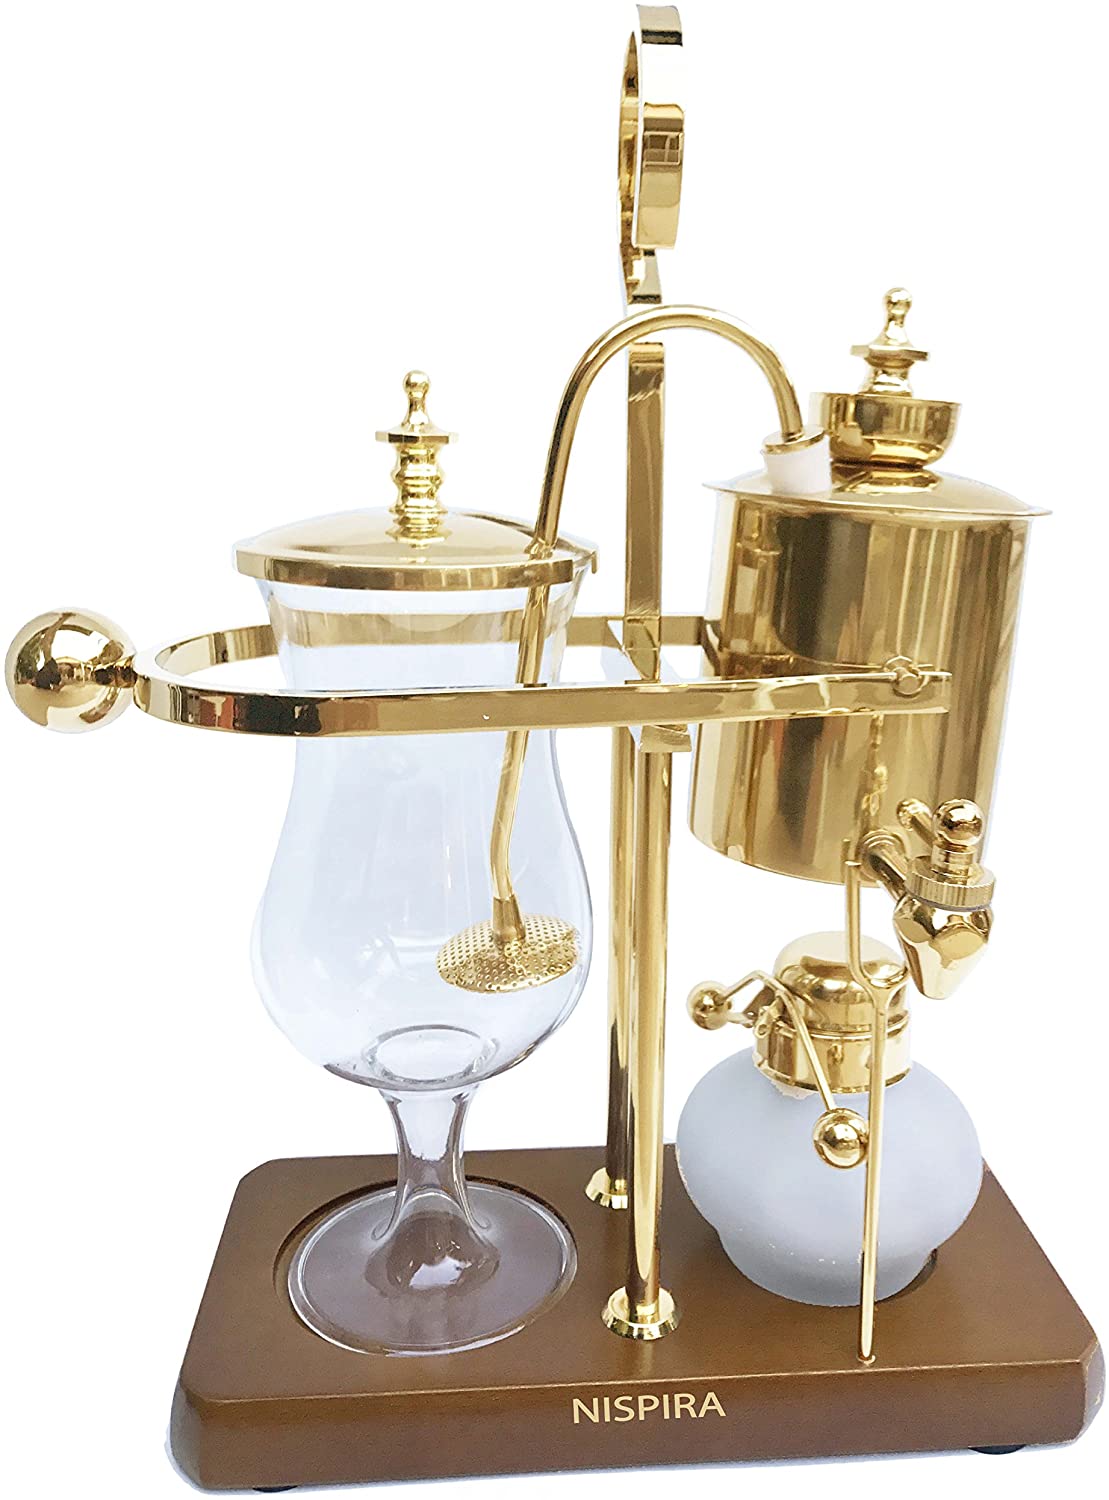  Siphon Coffee Maker, Luxury Royal Family Balance Syphon Coffee  Maker Siphon Brewer Elegant Design Retro-Style Coffee Maker Japanese Style  Vacuum Glass Siphon Pot, Capacity: 360ml (Type C): Home & Kitchen